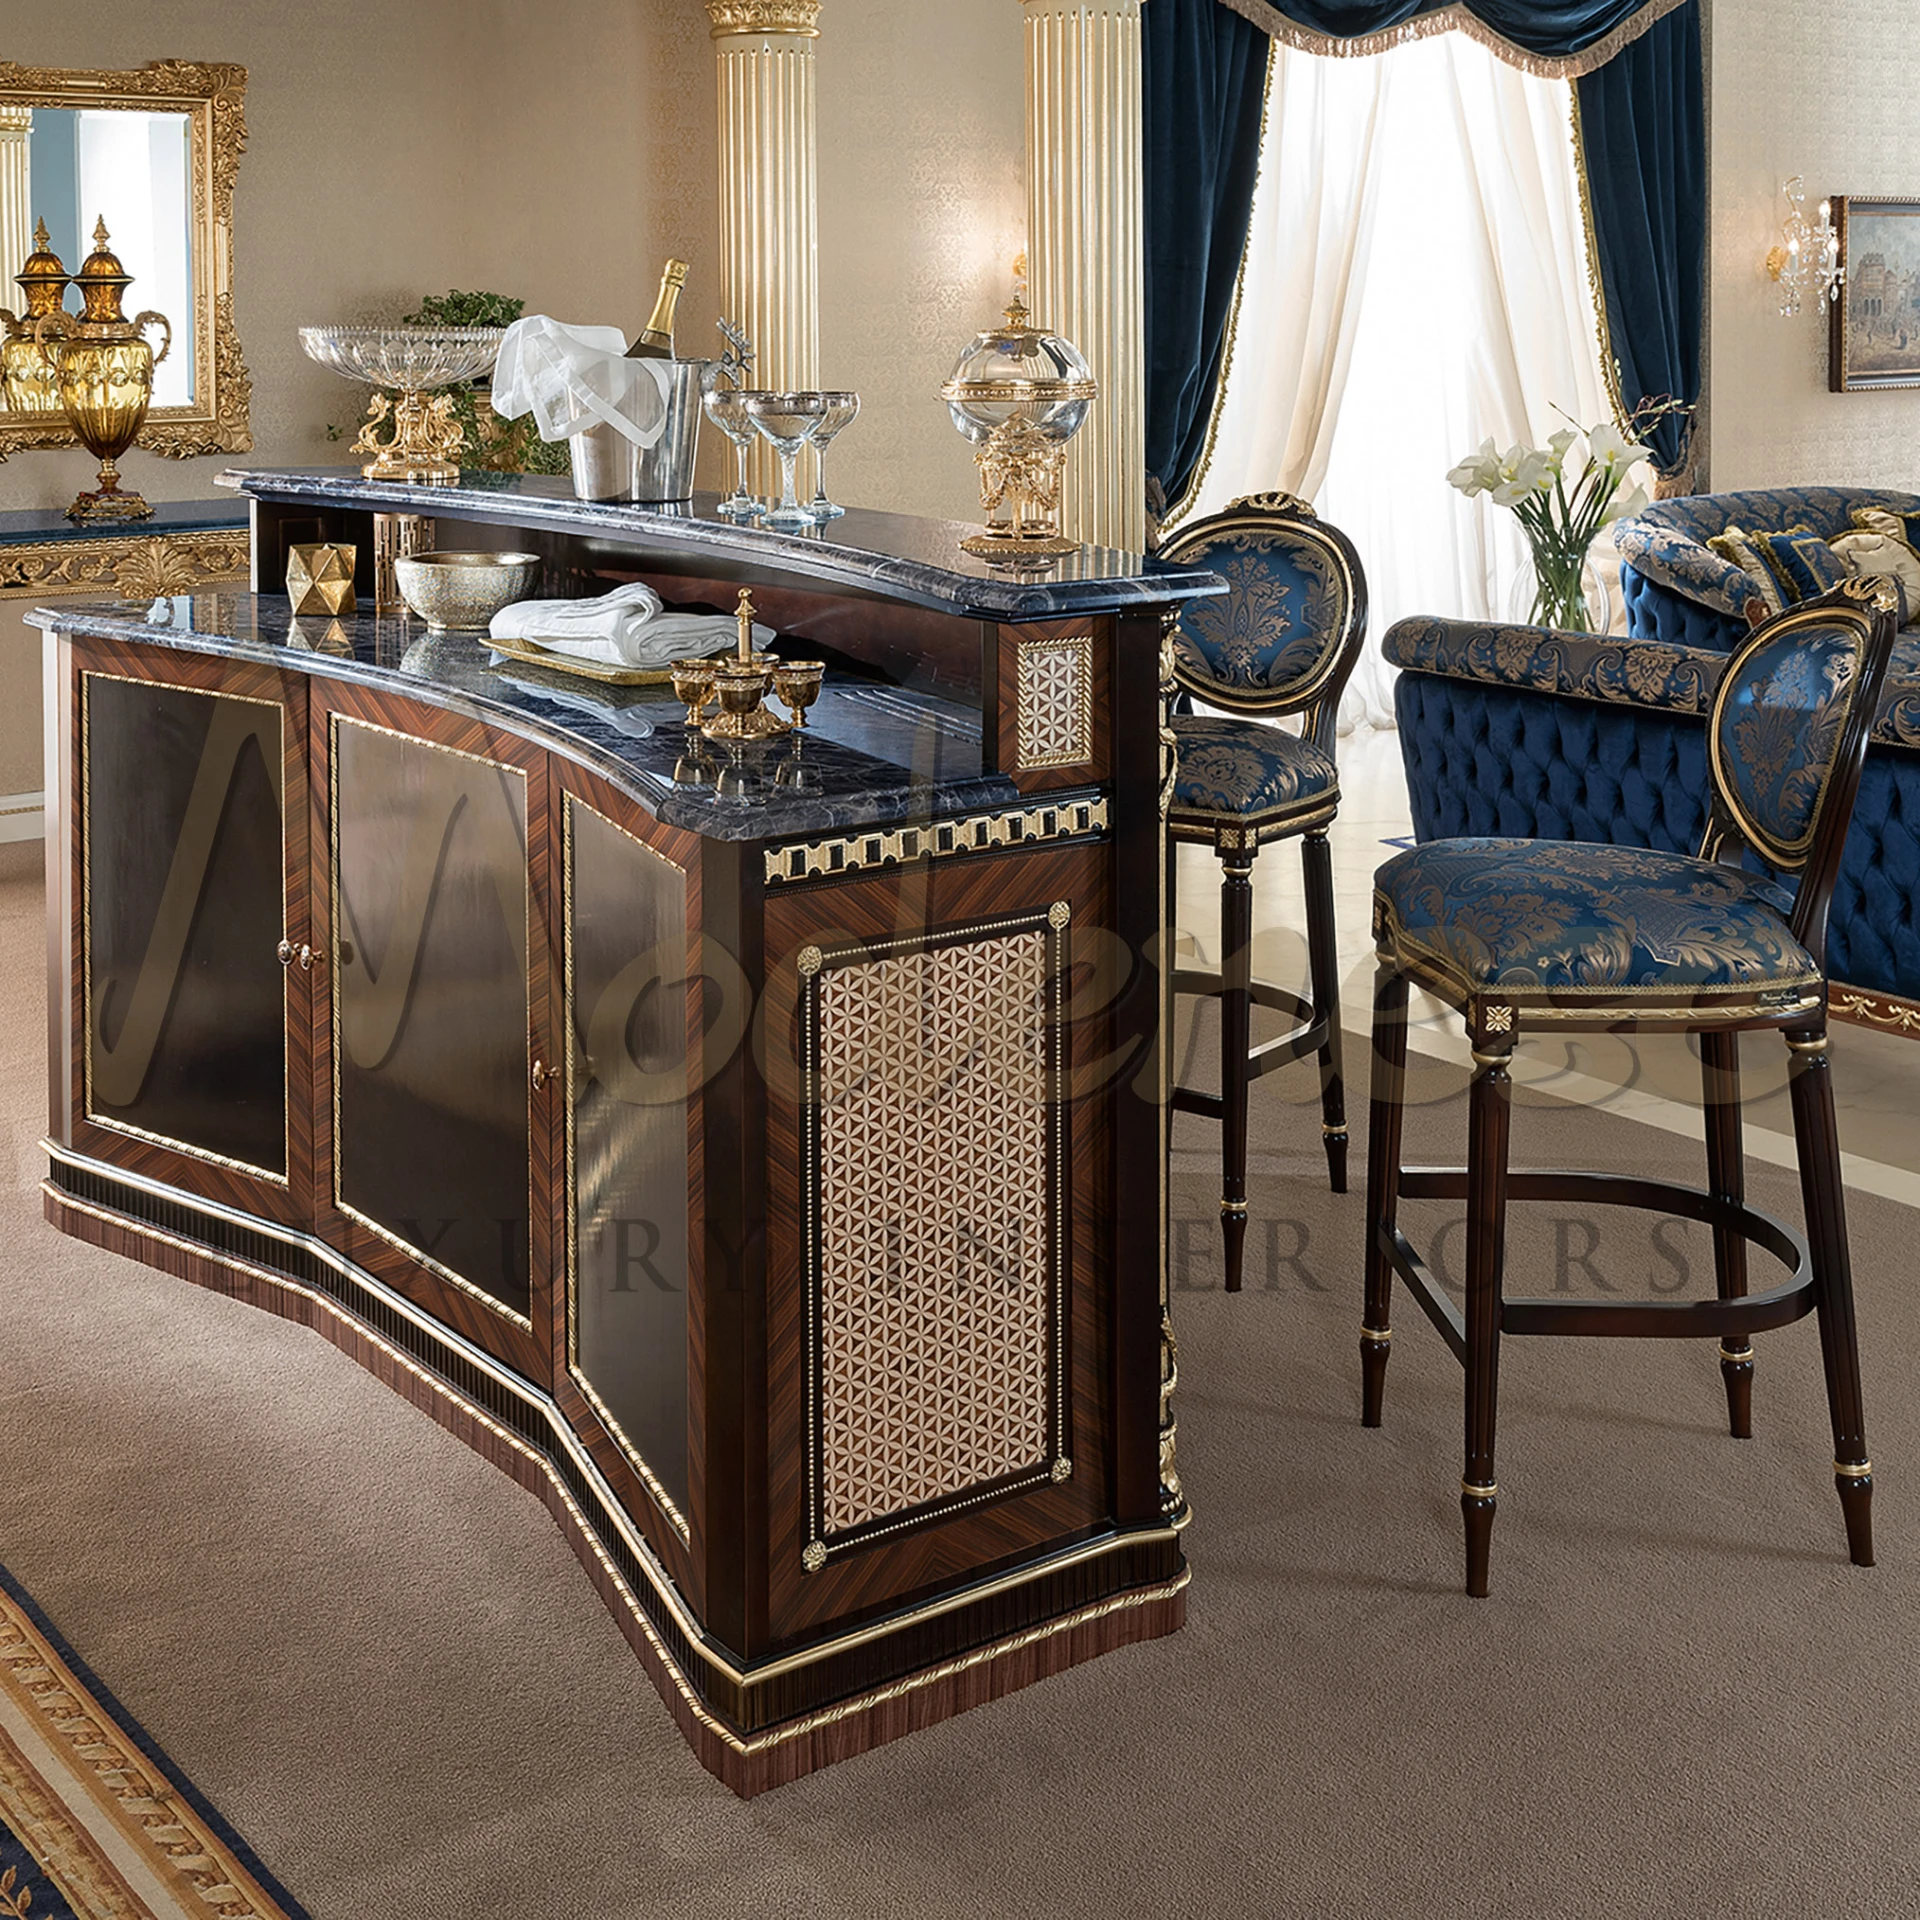 Make a statement with Modenese Furniture's rosewood bar interior. With gold leaf accents, marquetry, and marble interior.